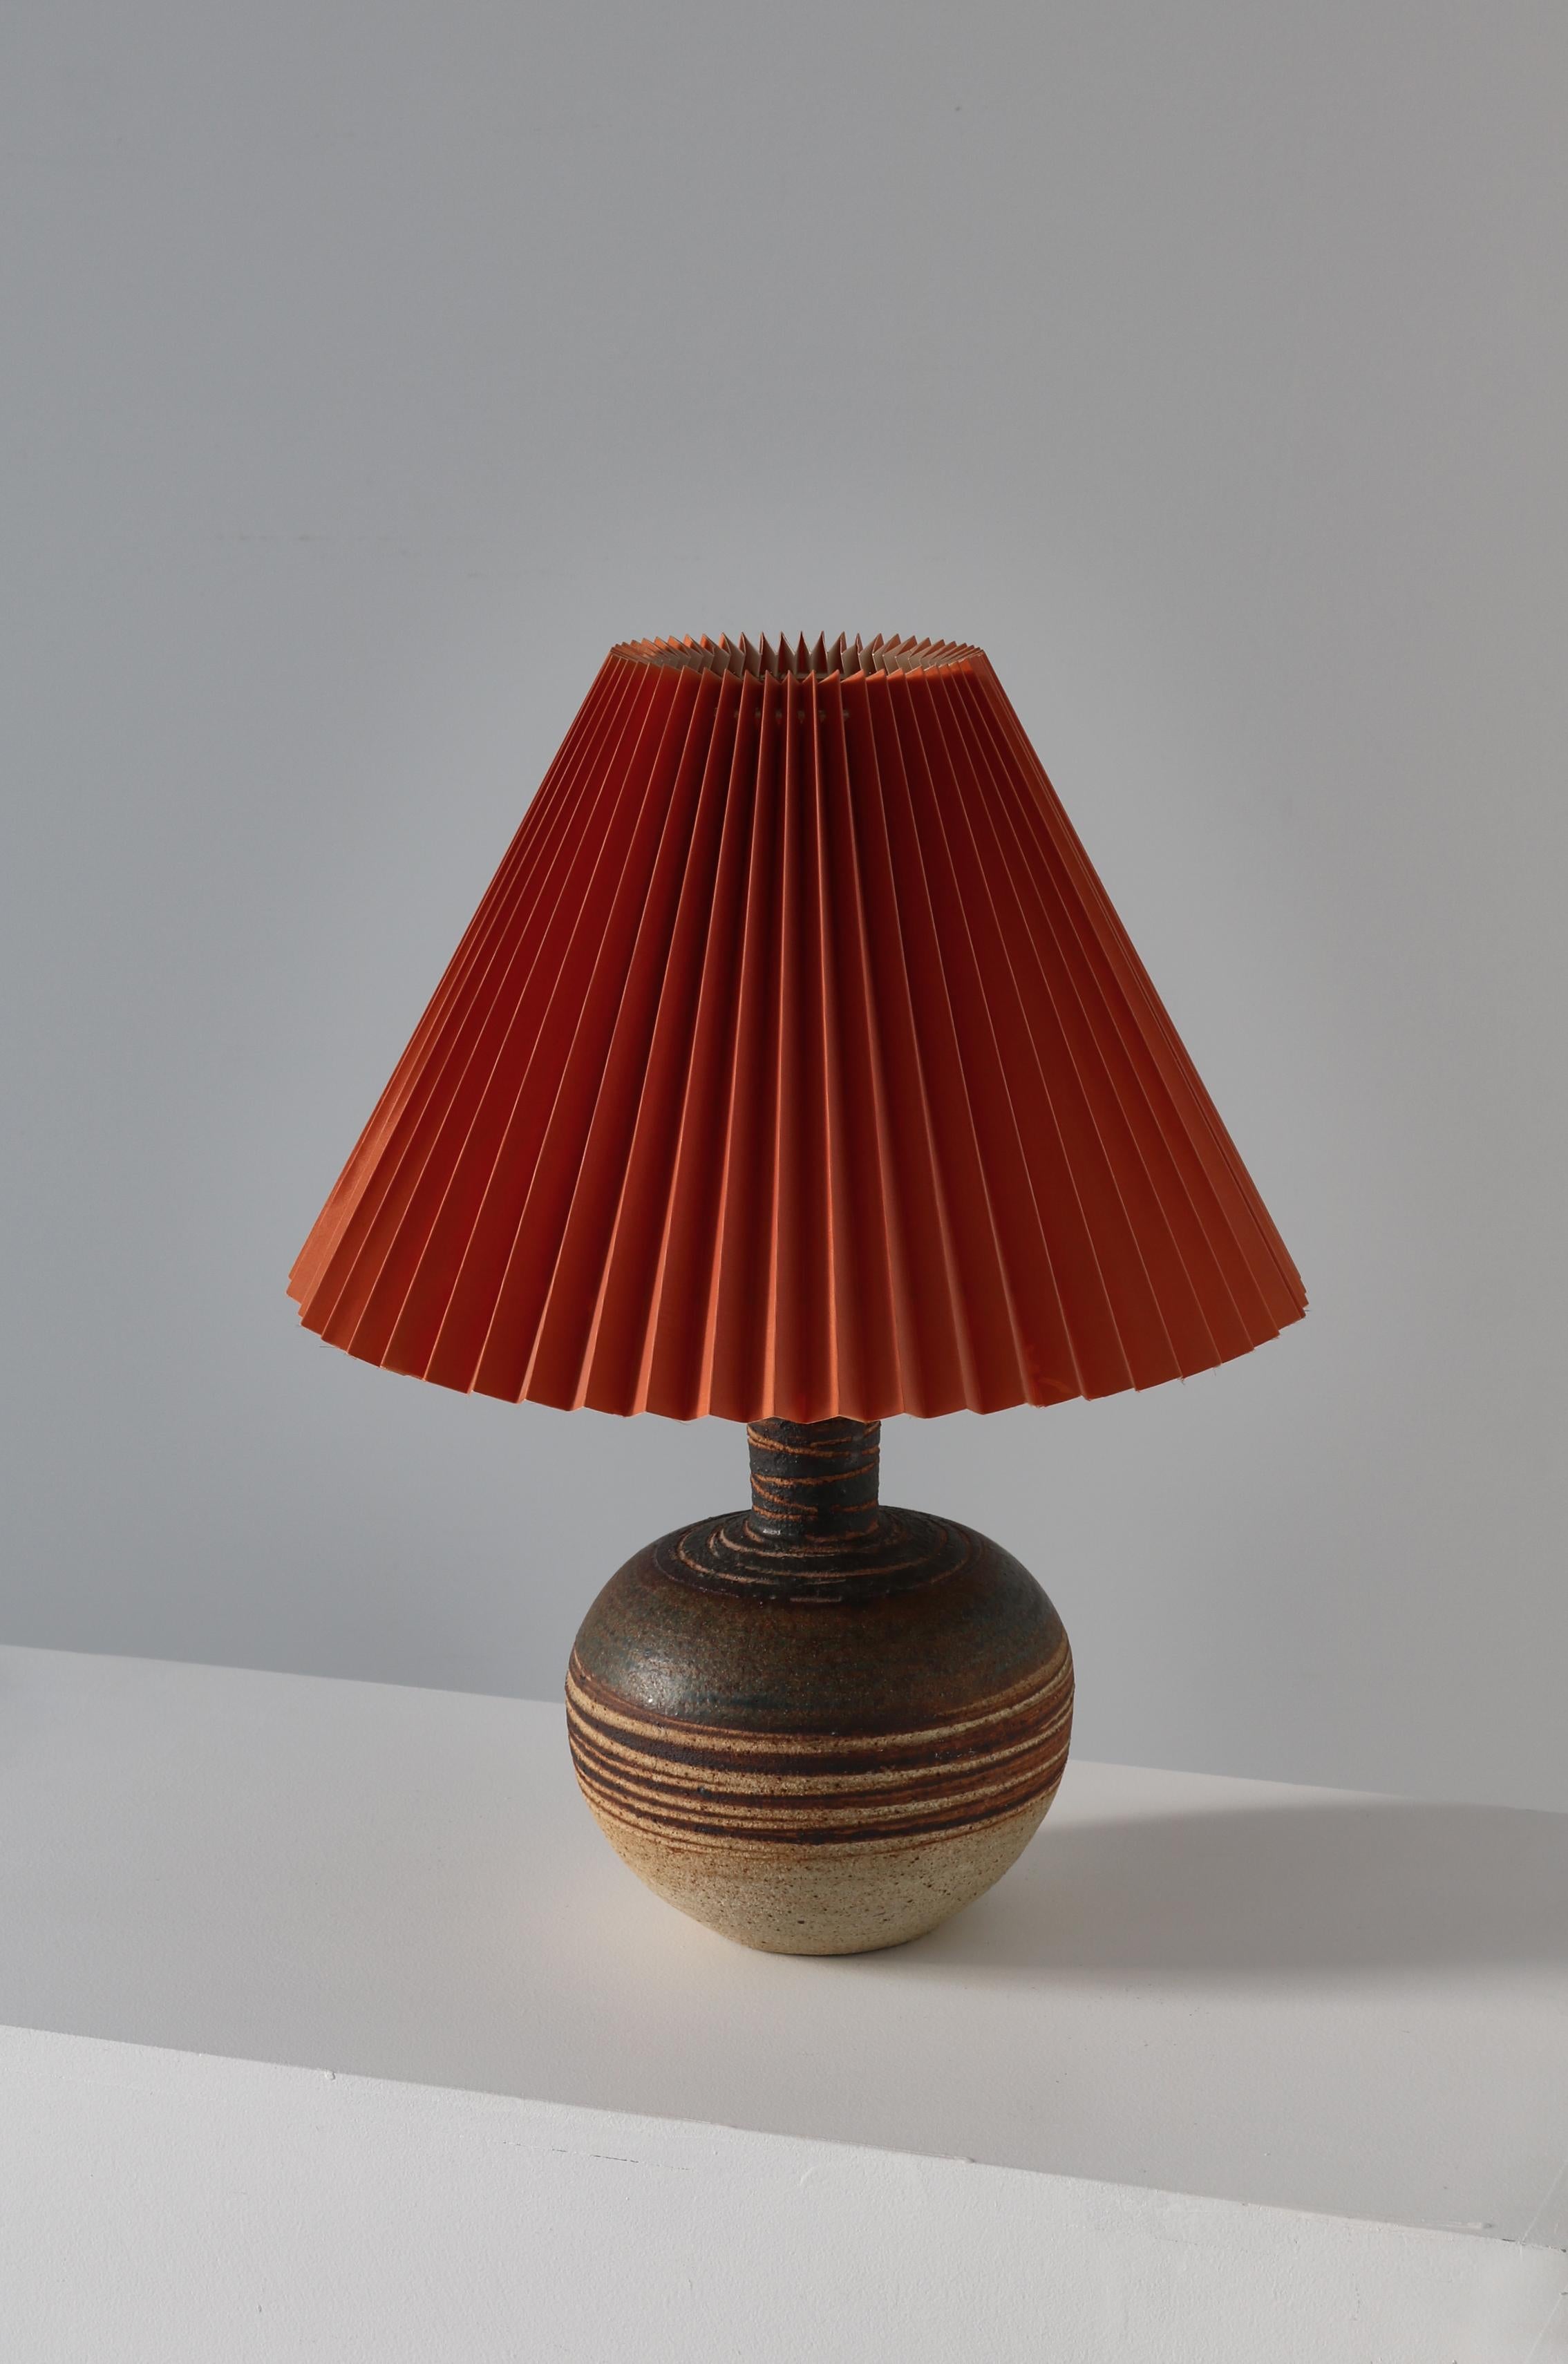 Wonderful 1960s design by Danish ceramics artist Tue Poulsen. Handcrafted table lamp in chamotte stoneware with glazing in earth colors. Great condition. Original burned red shade. Marked with 